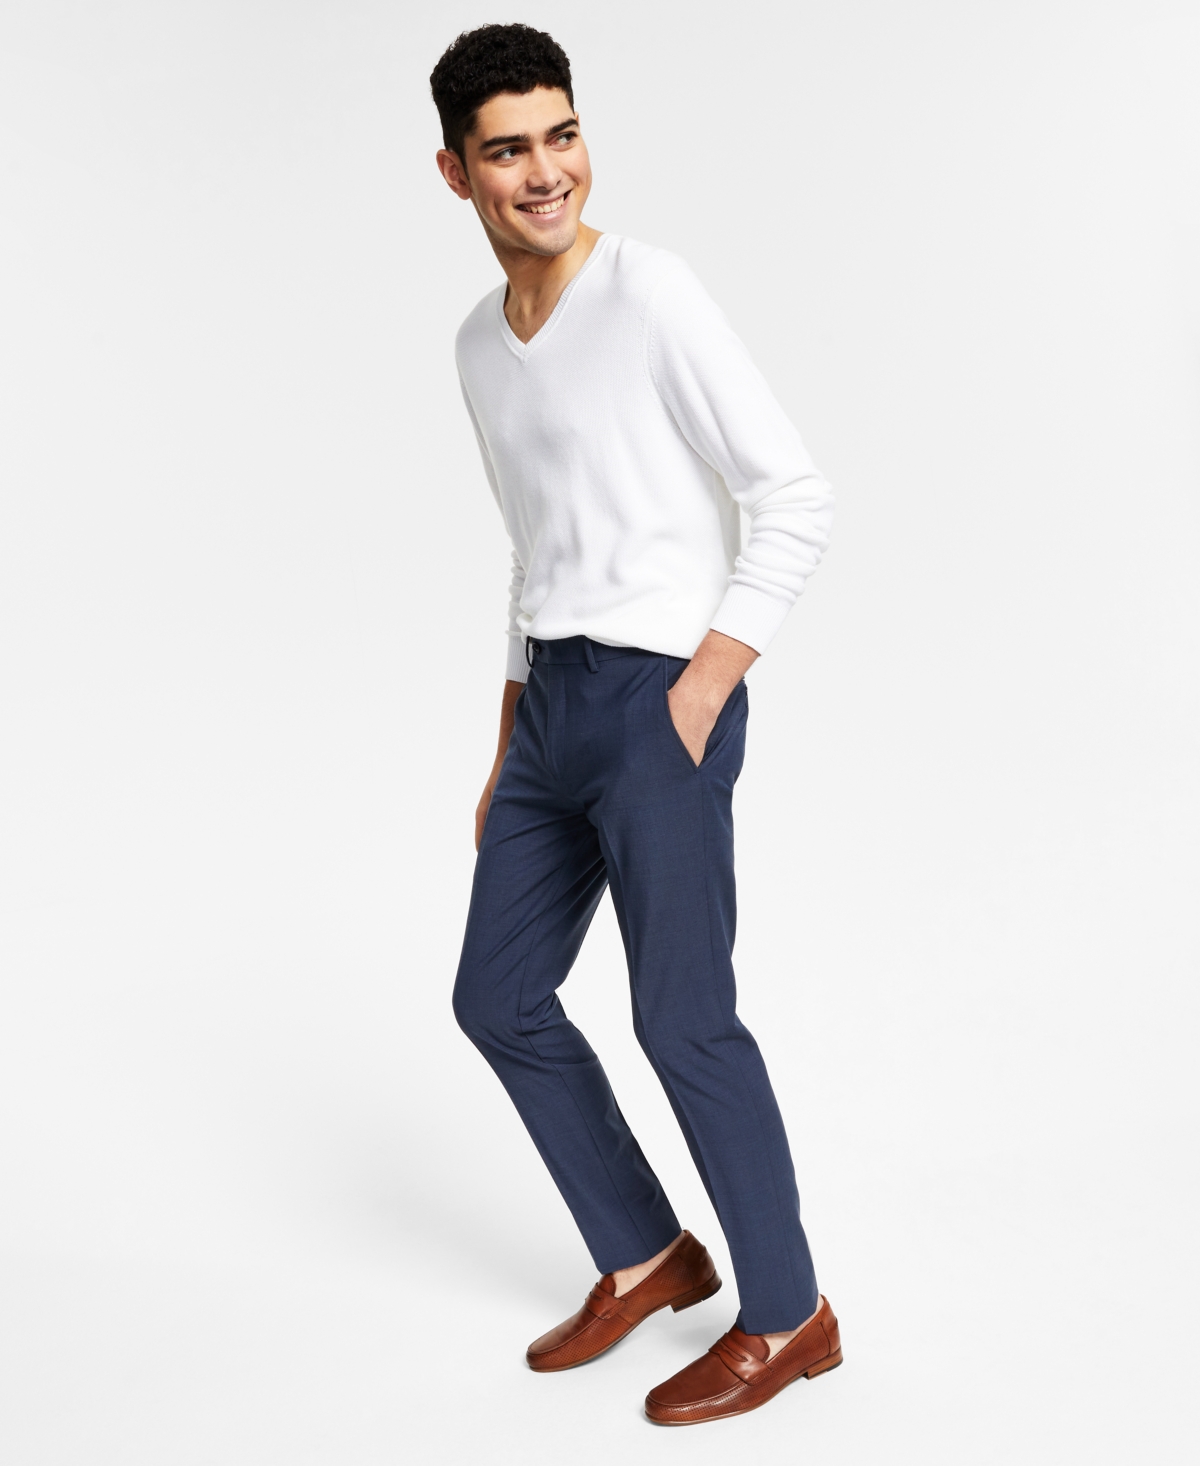 Men's Slim-Fit Wool-Blend Solid Suit Pants, Created for Macy's - Blue